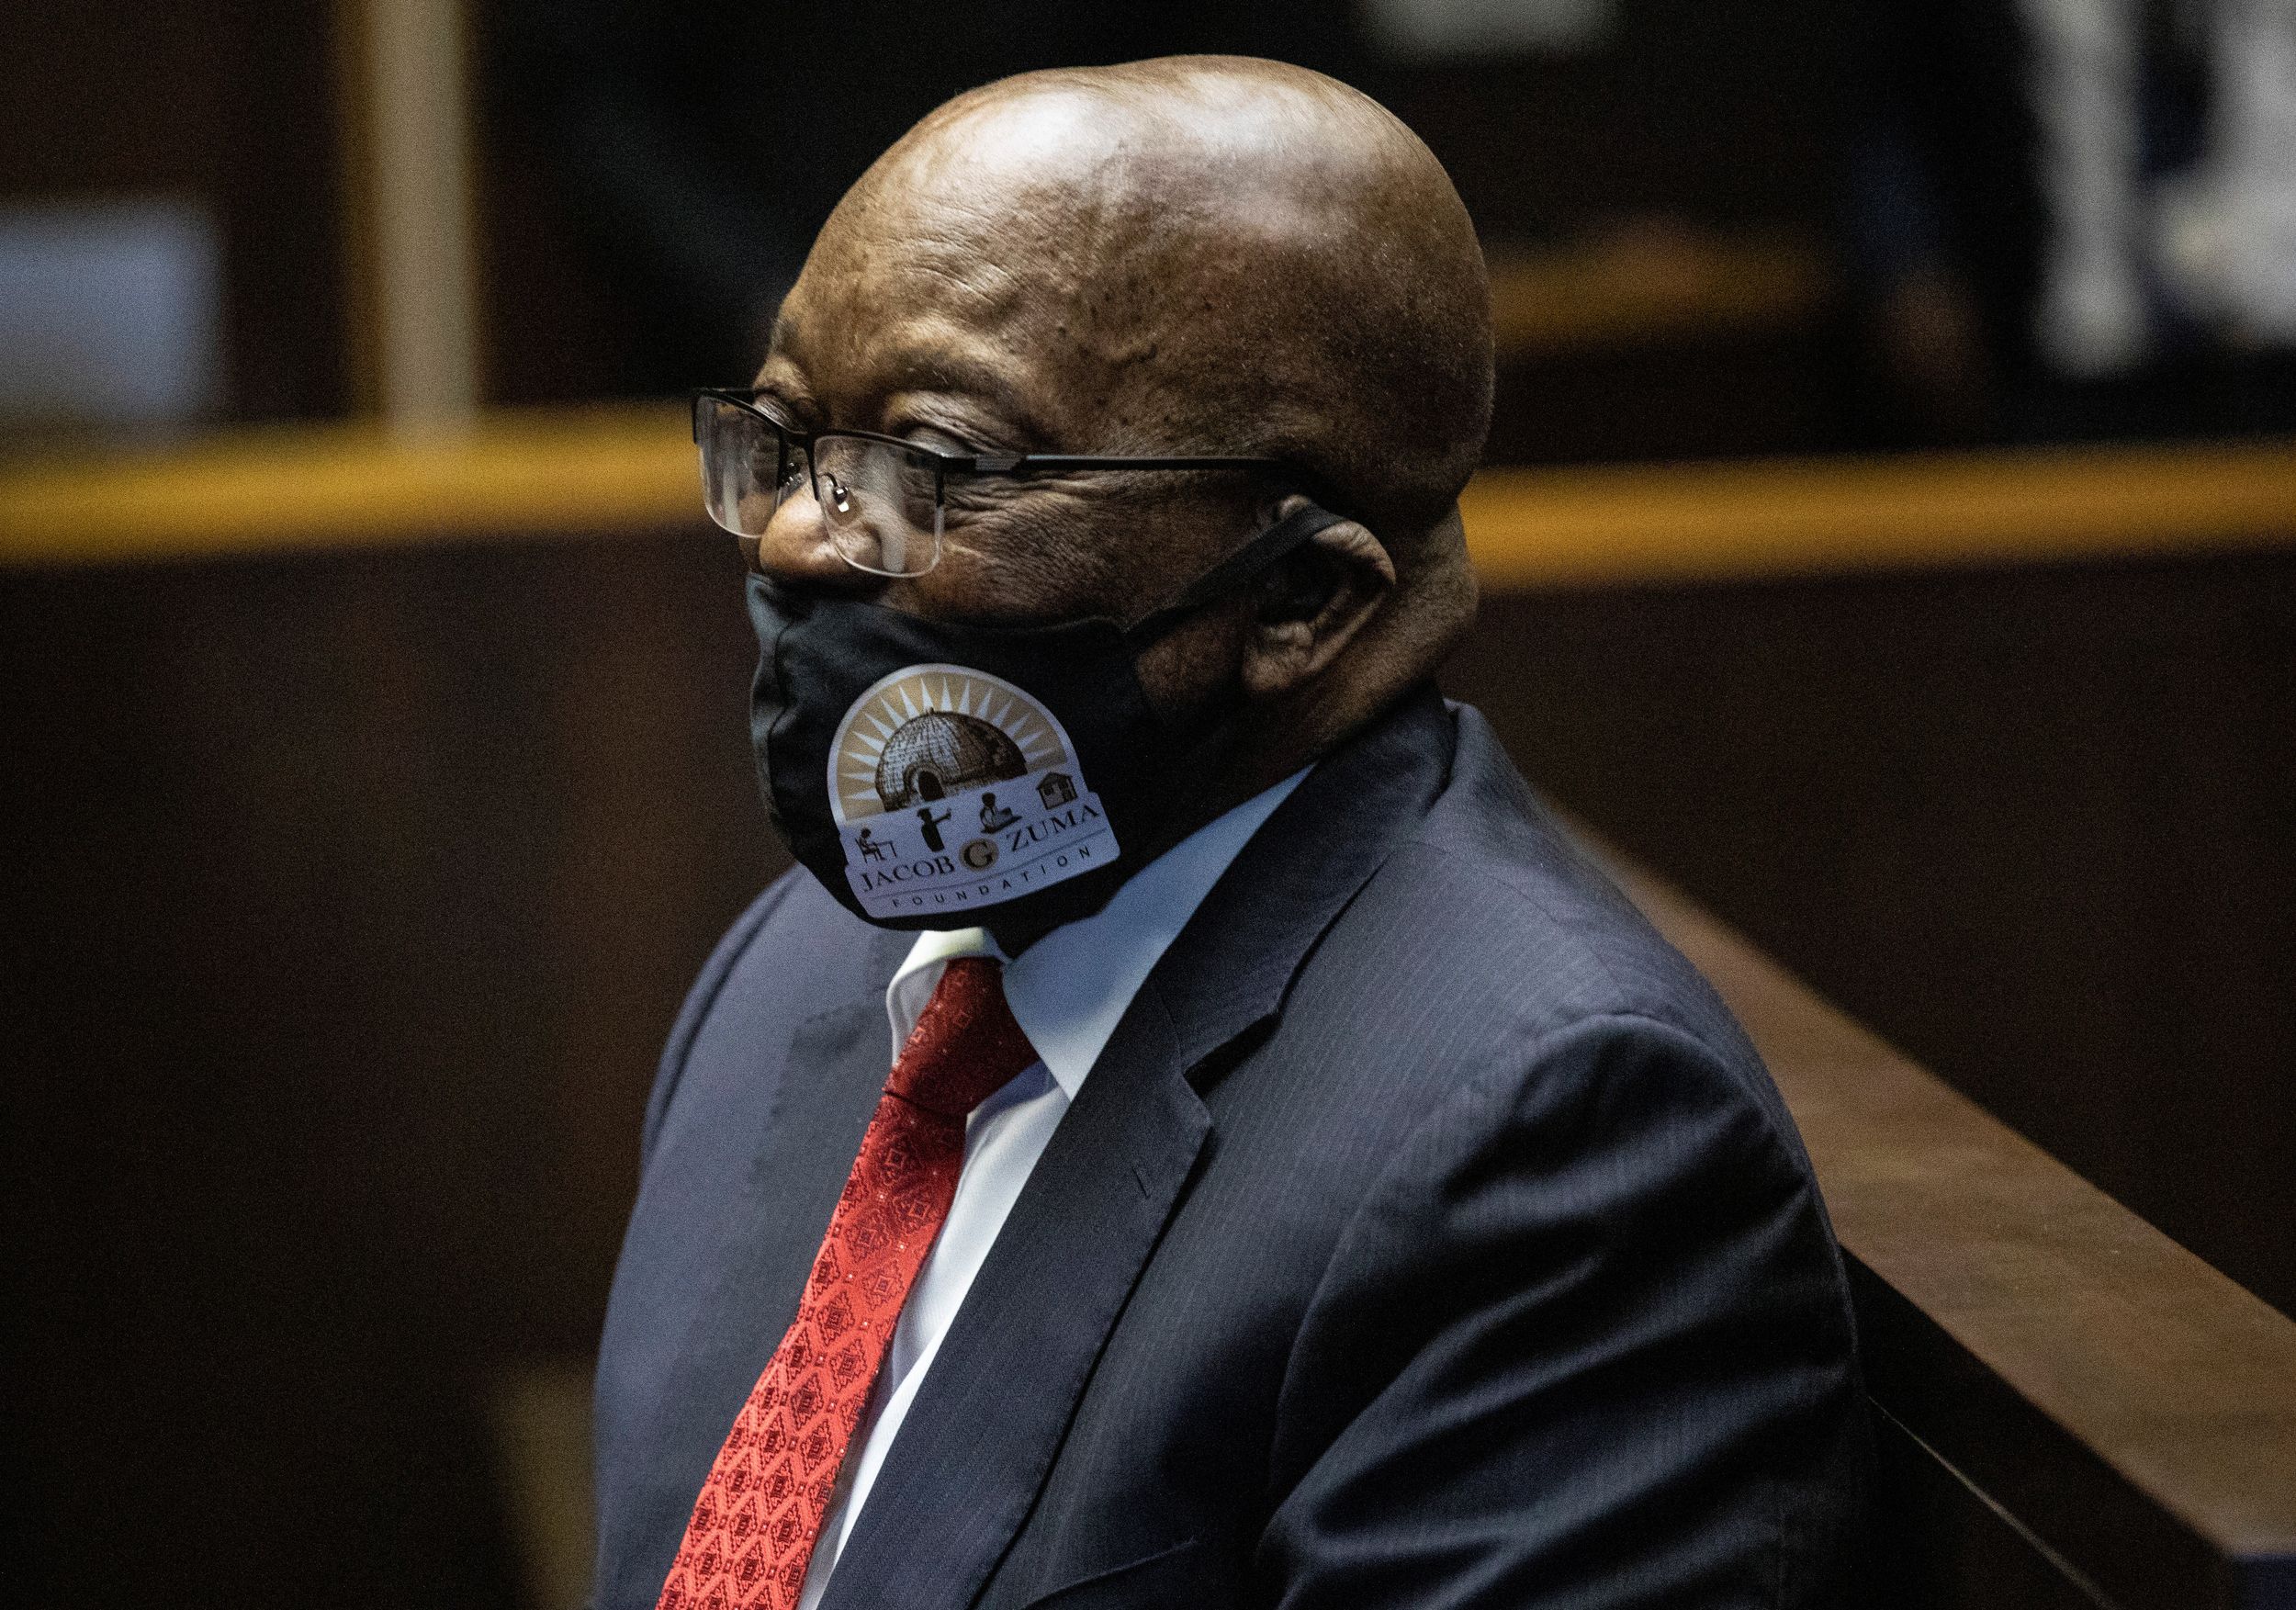 Hard Numbers: Zuma's day in court, Burkina Faso’s civilian killings, the soaring cost of water in the US, and Trump's H1B visa hit